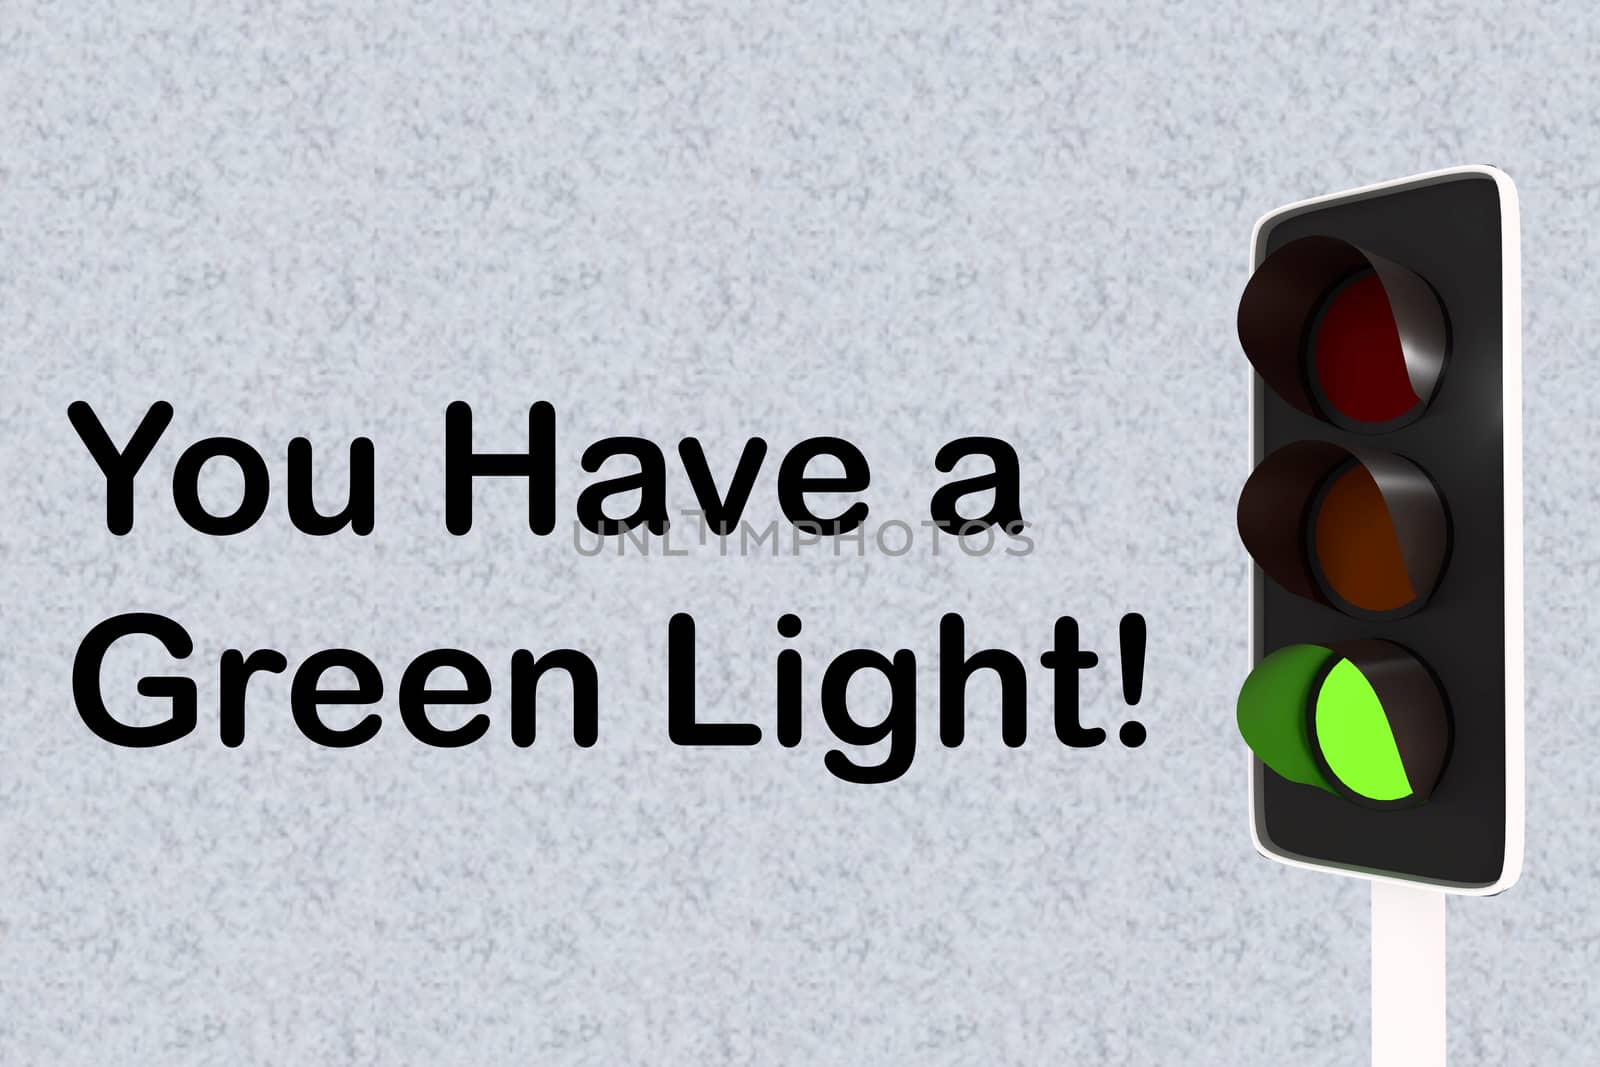 3D illustration of green traffic light, along with encouraging text You Have a Green Light!